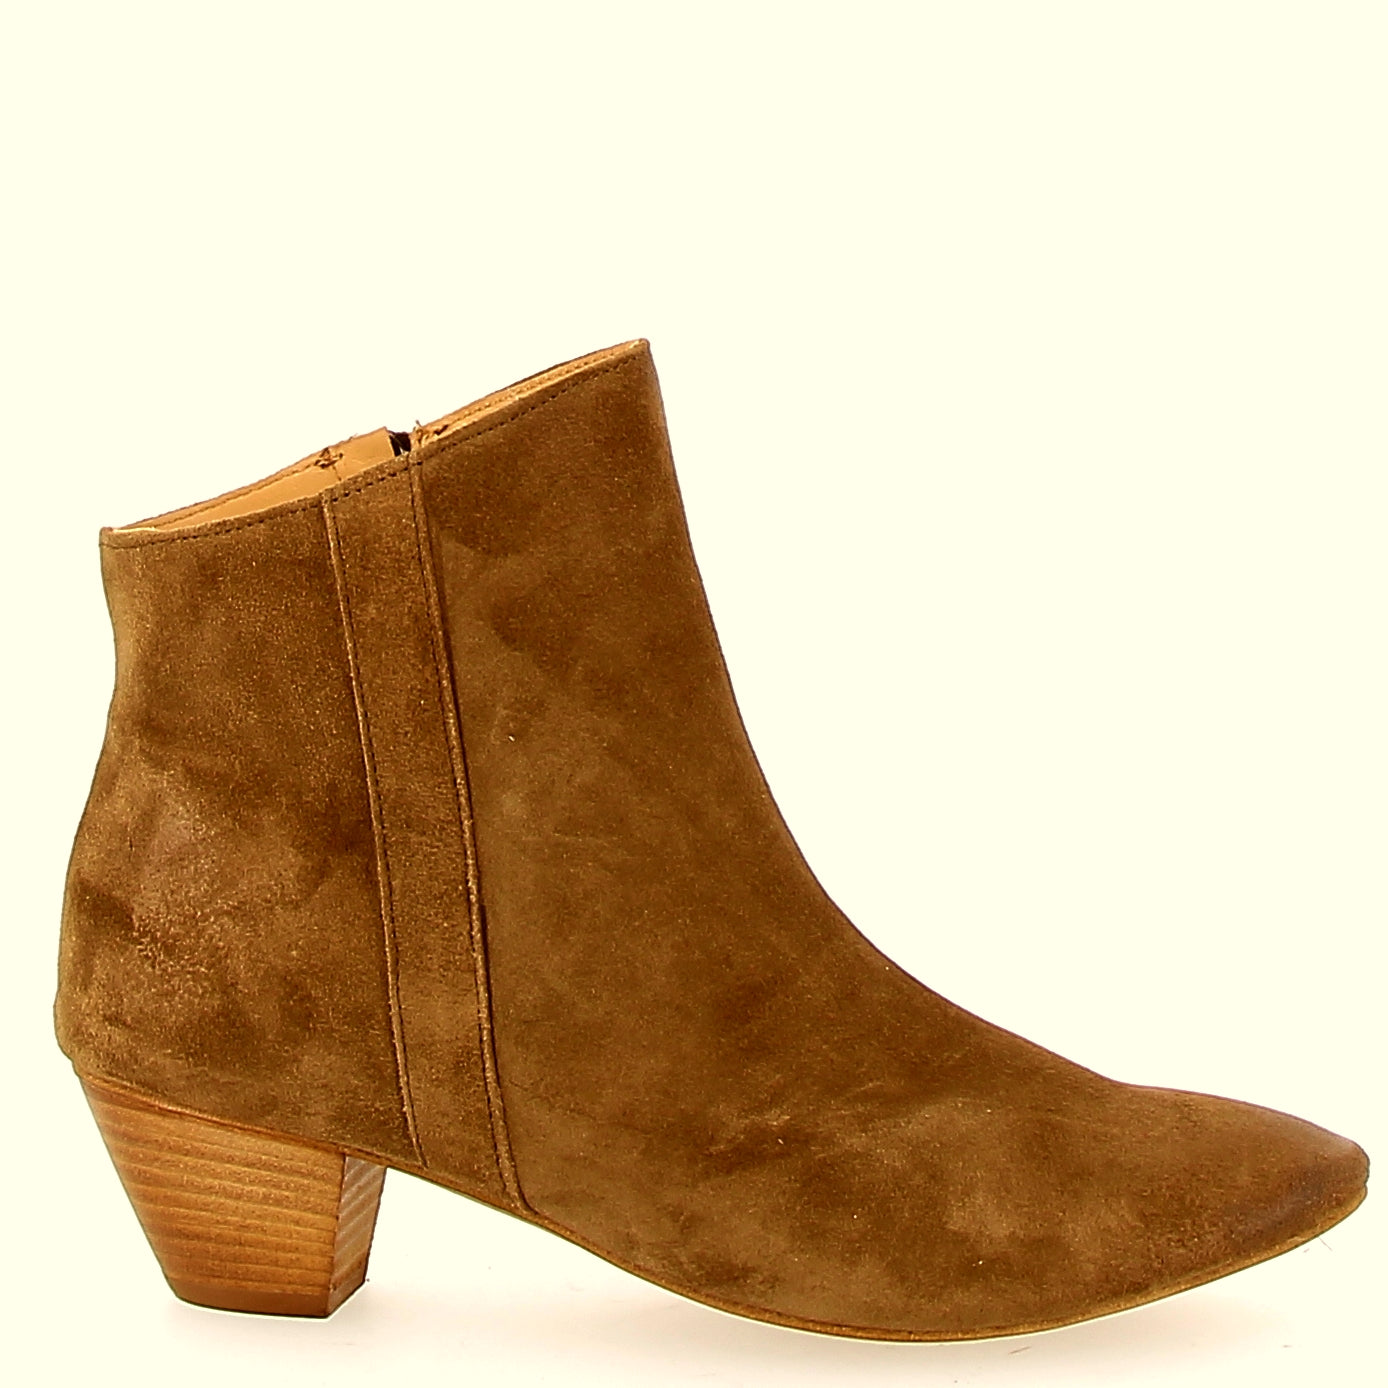 Walnut-colored suede ankle boot